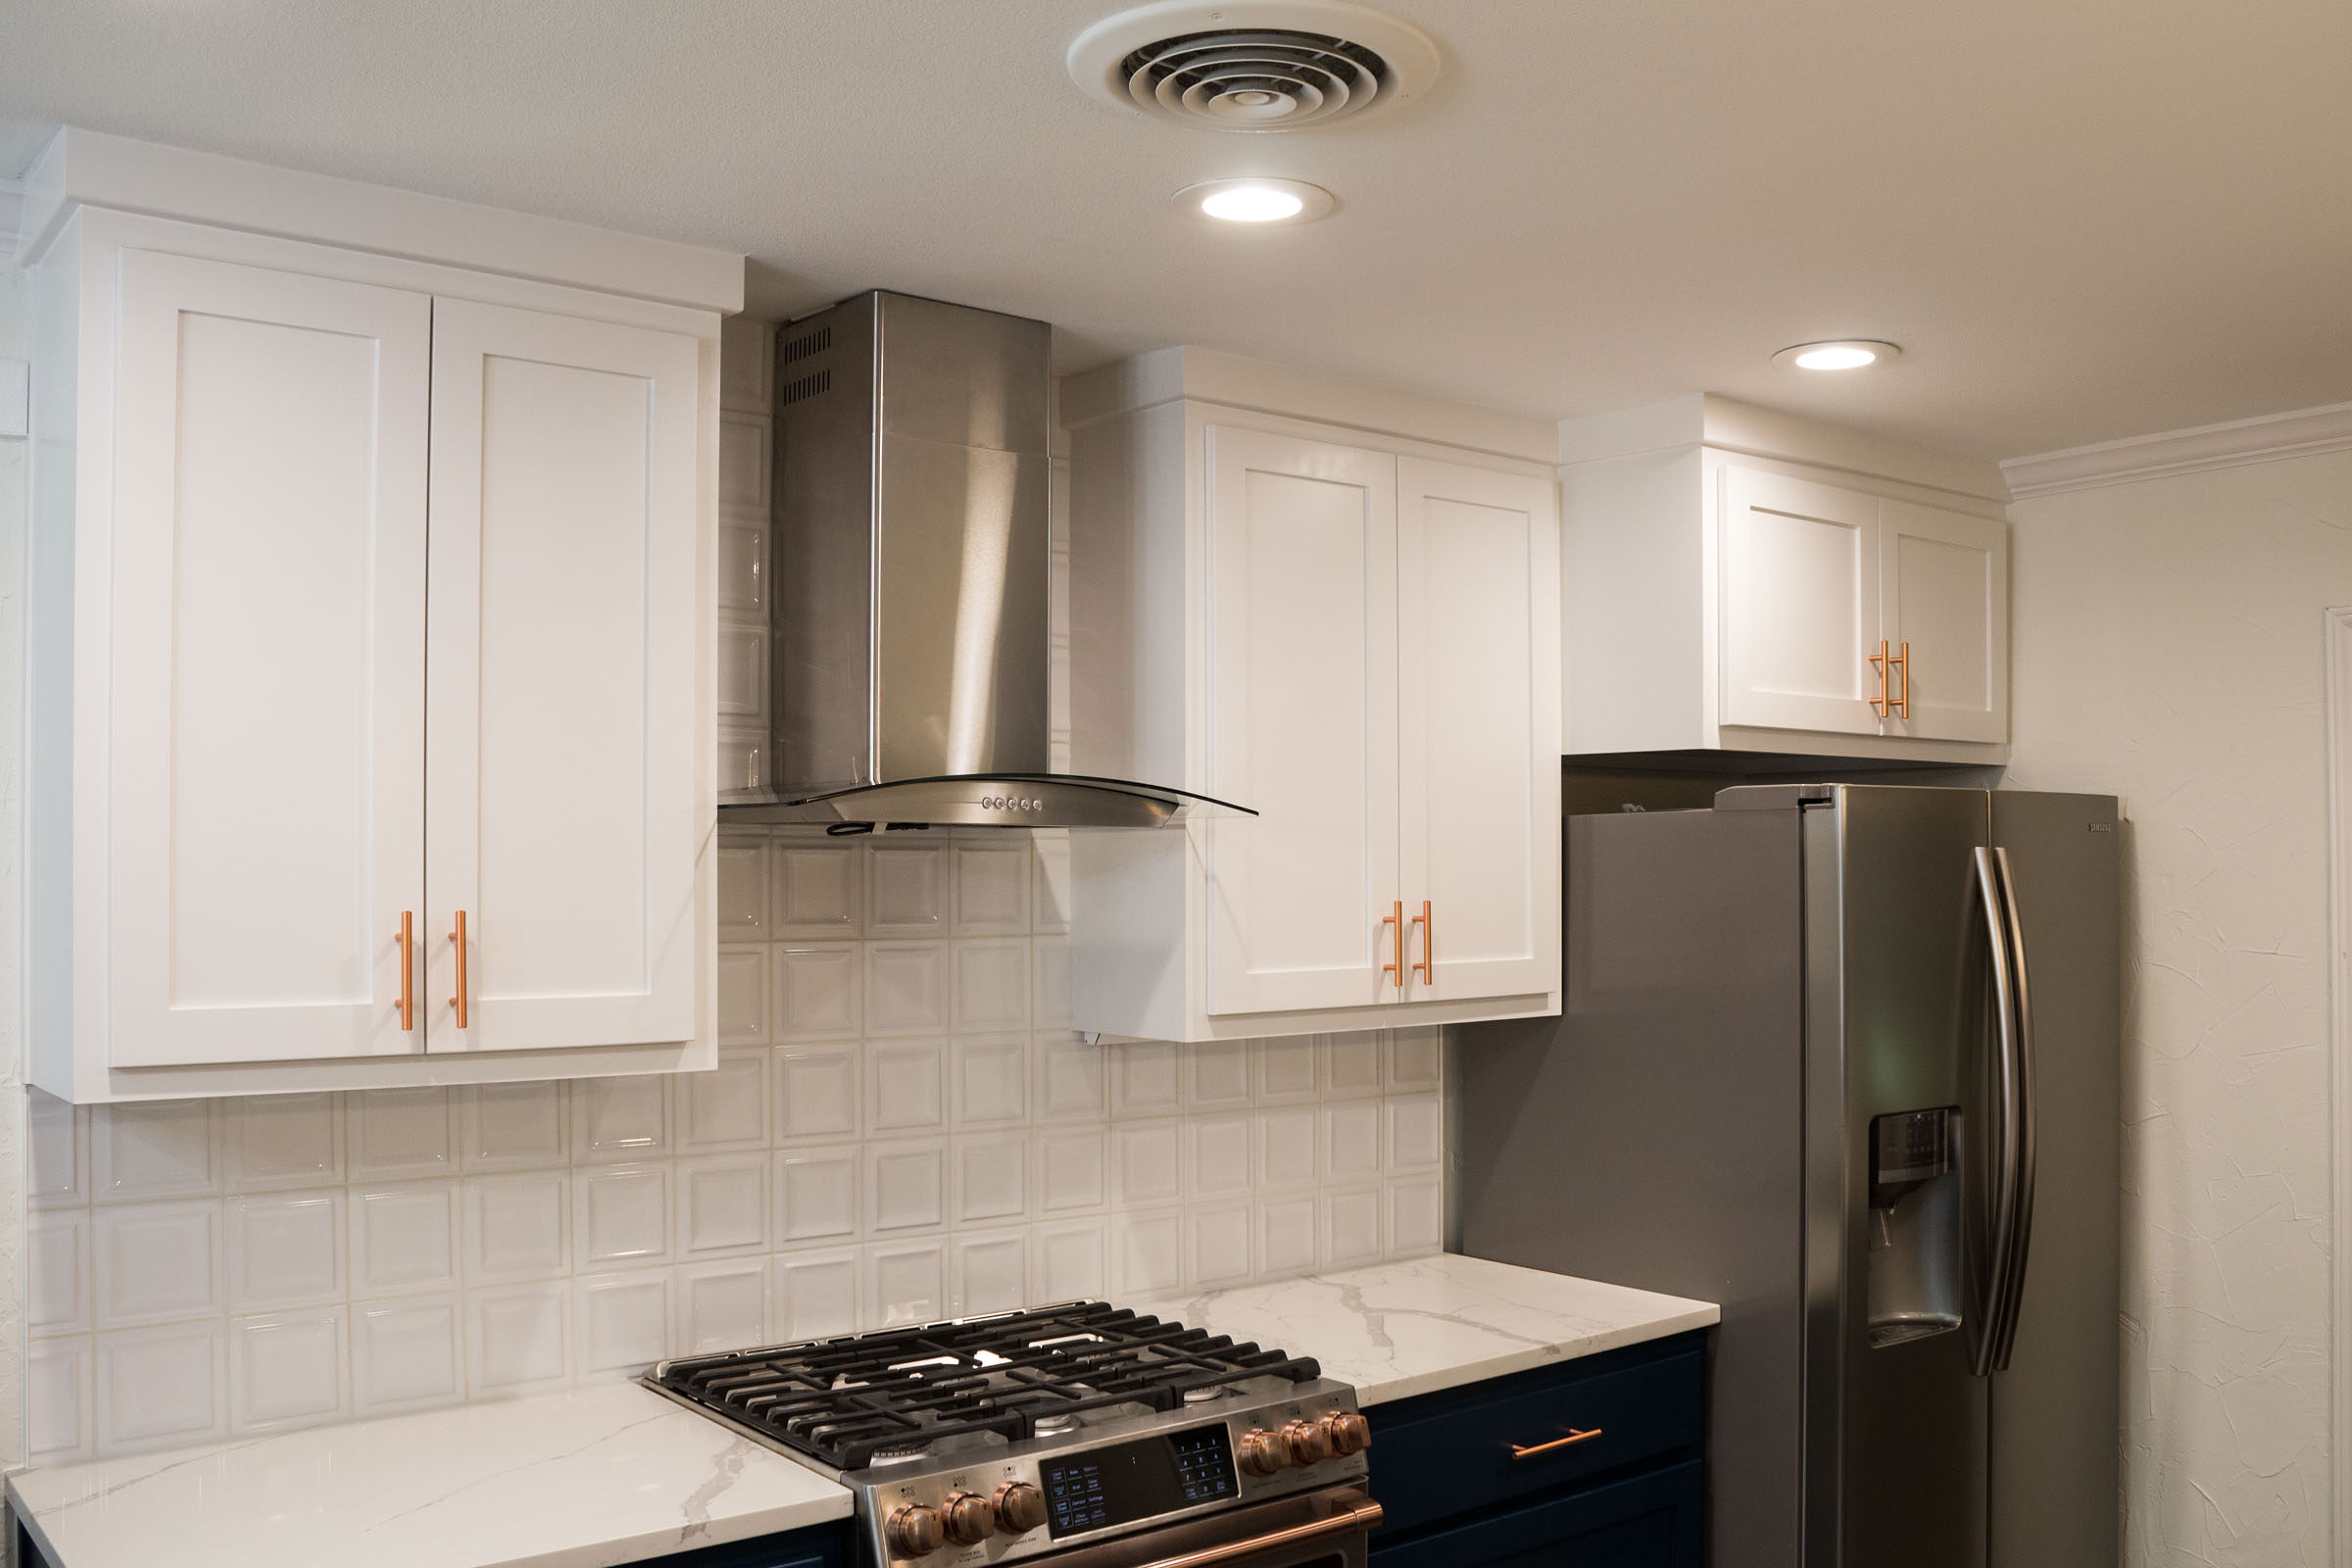 Stainless steel vent hood, copper hardware, white upper cabinets, navy lower cabinets